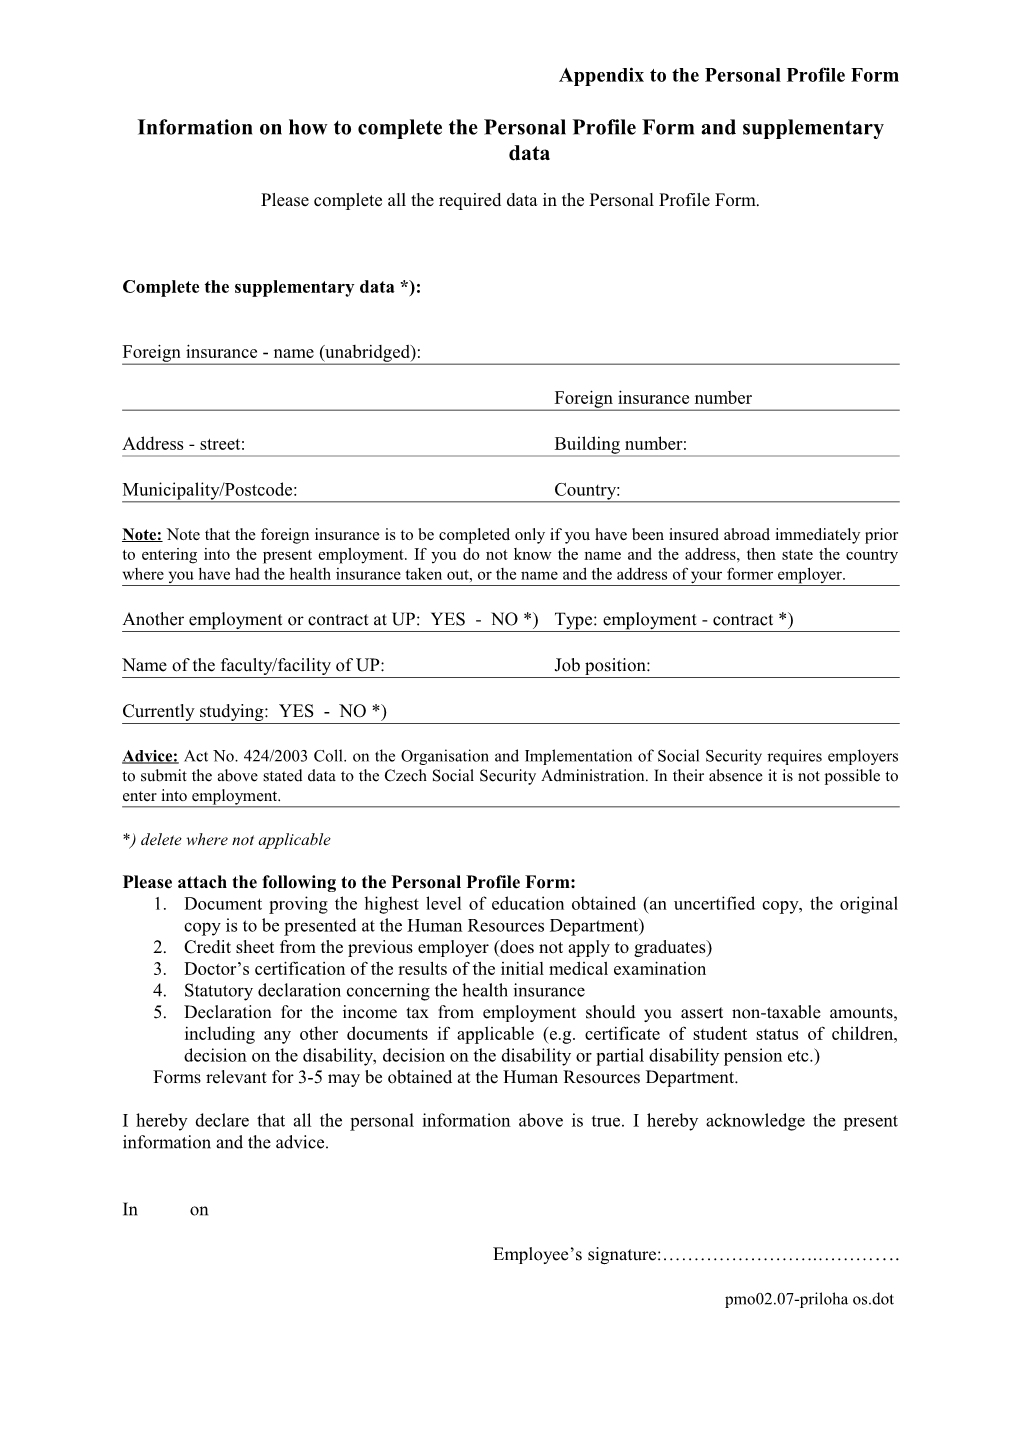 Appendix to the Personal Profile Form